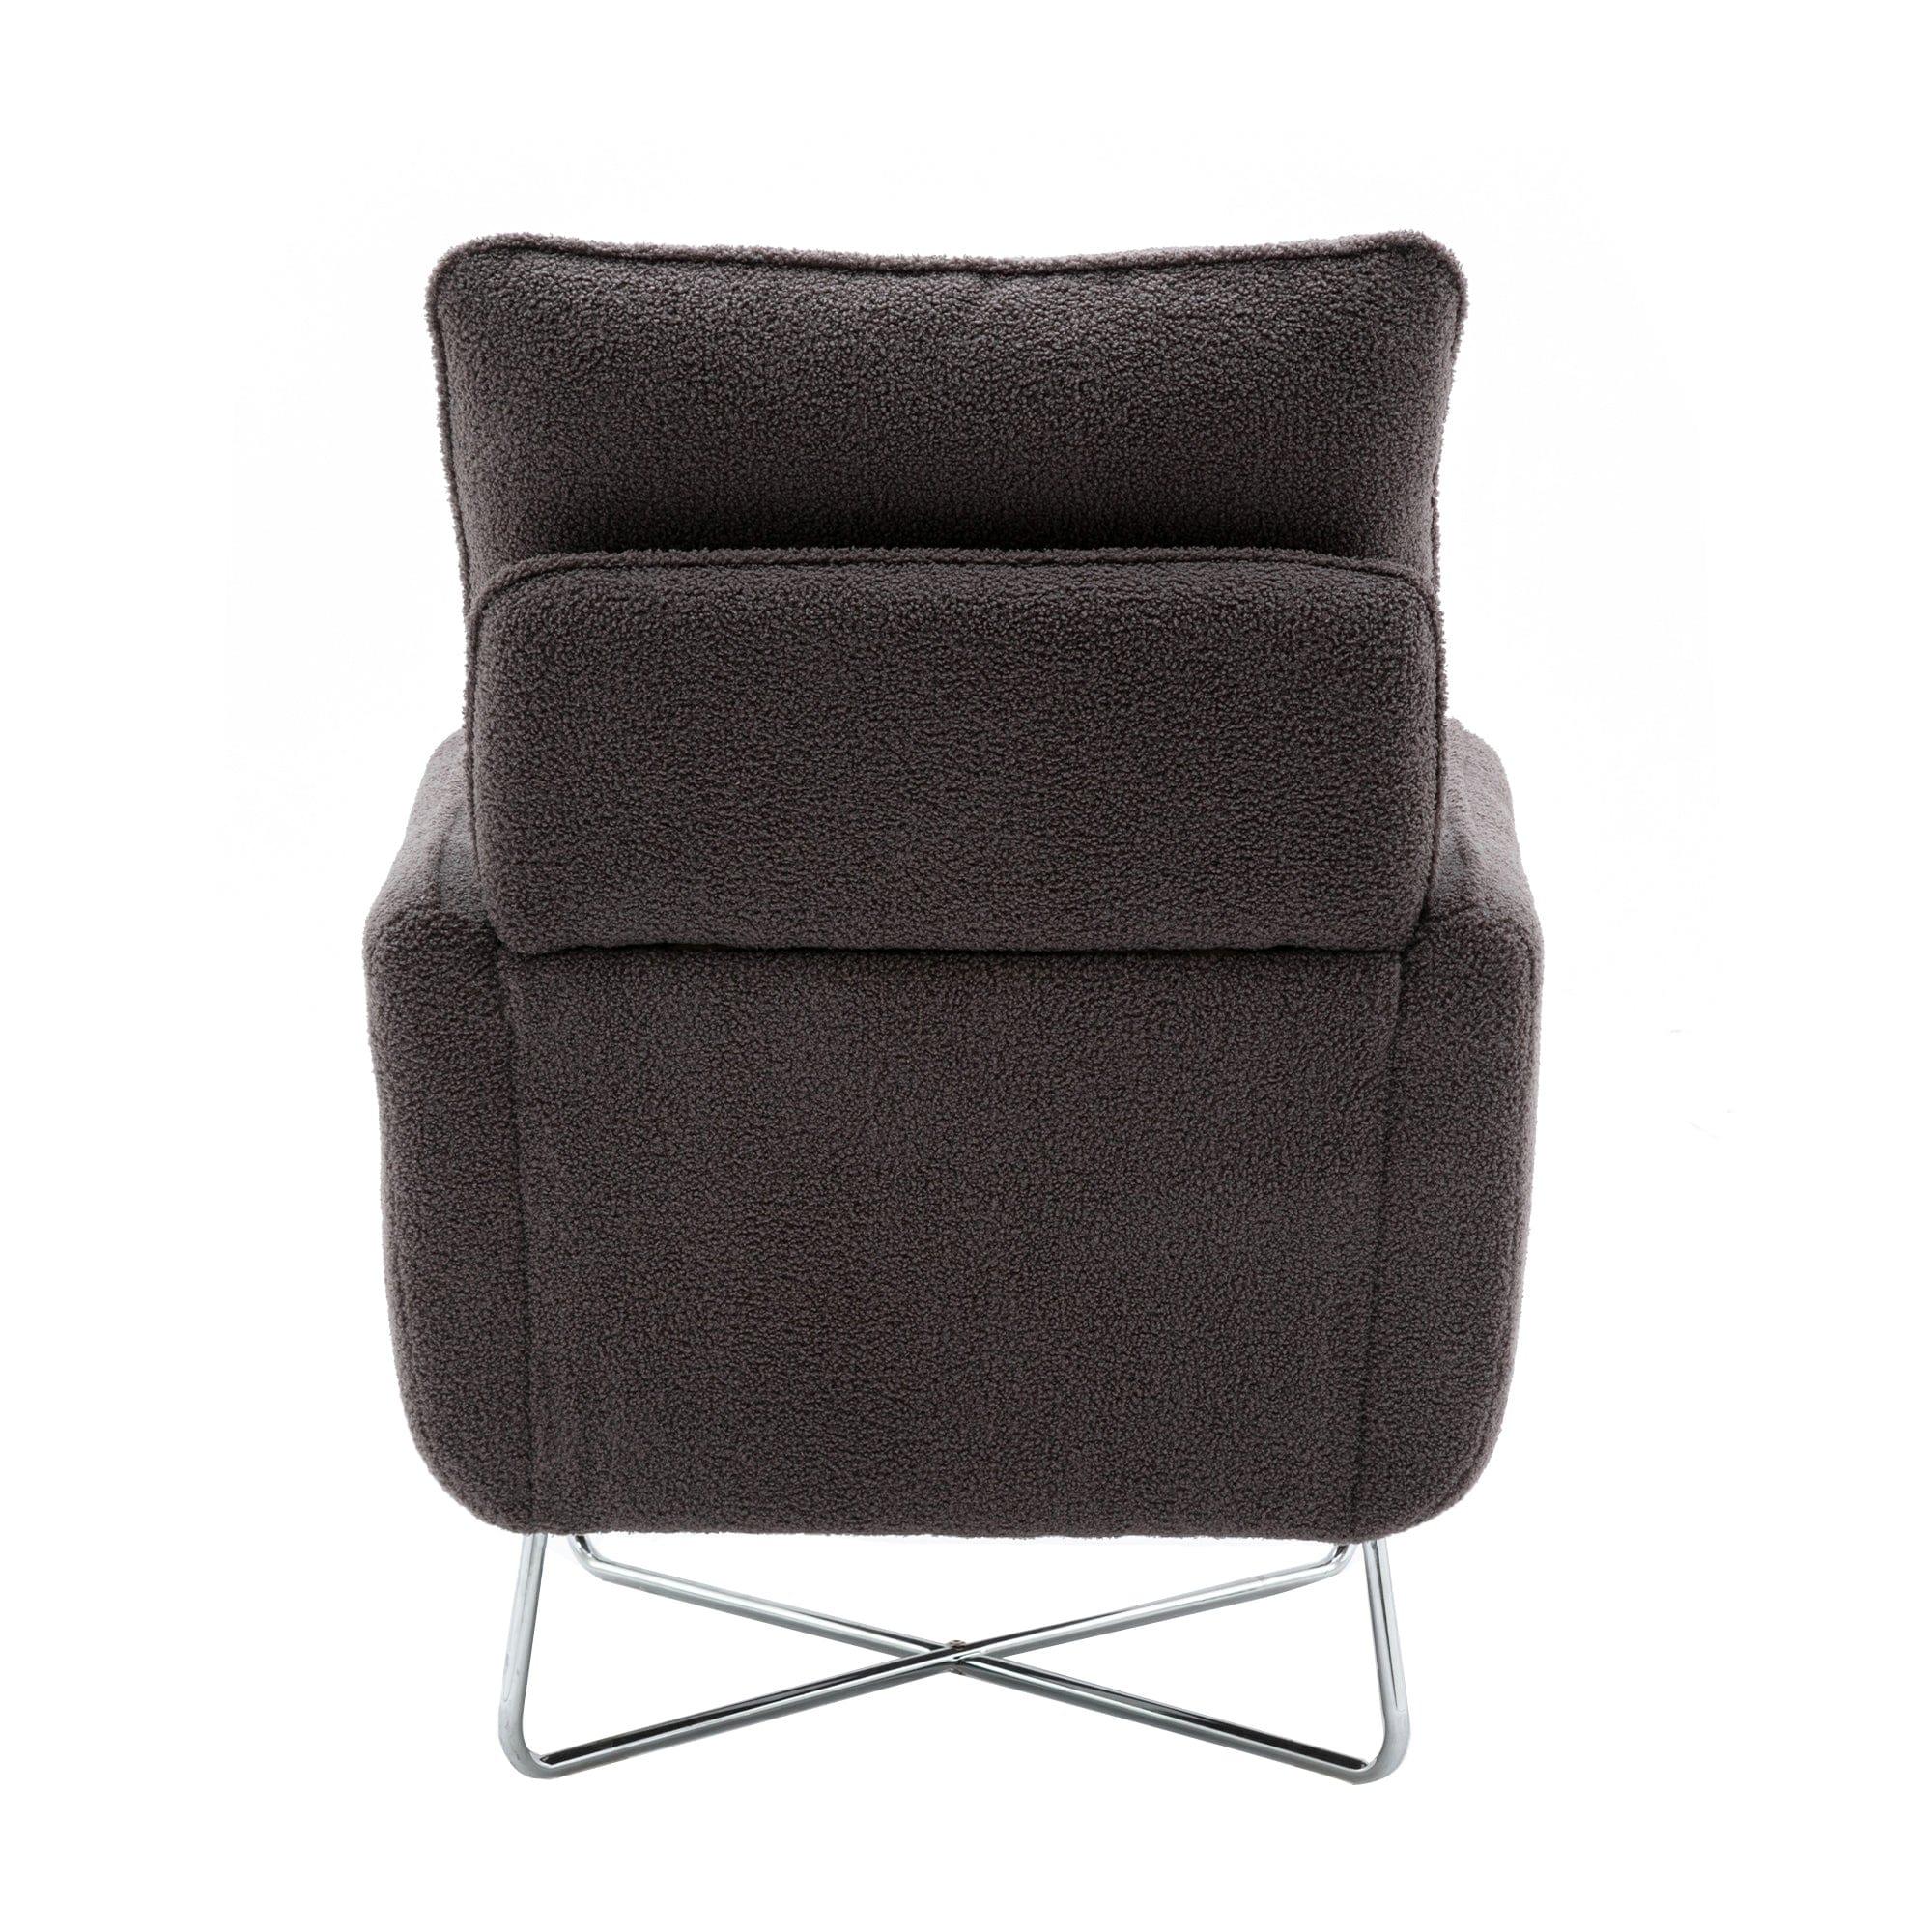 Shop Orisfur. Modern Comfy Leisure Accent Chair, Teddy Short  Plush Particle Velvet Armchair with Lumbar Pillow for Living Room Mademoiselle Home Decor